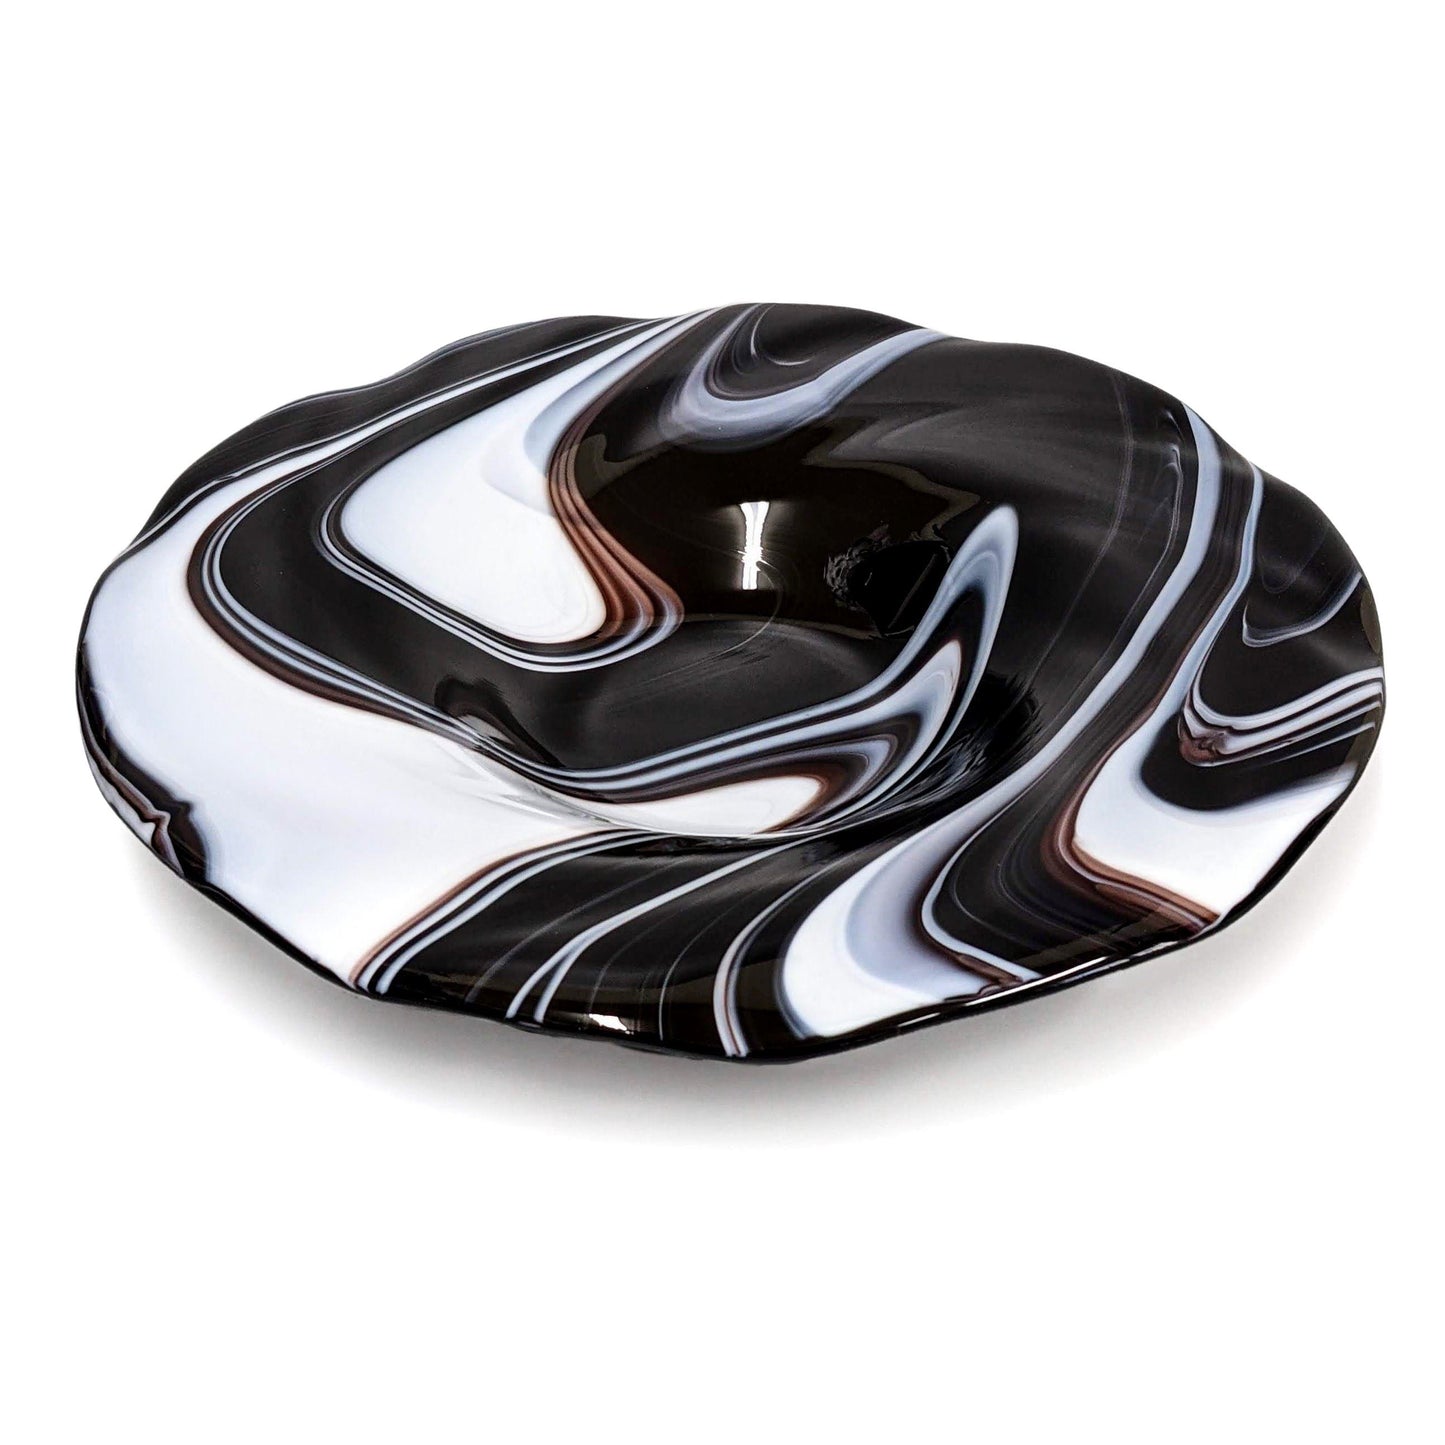 Contemporary Glass Art Bowl in Black and White | Gifts & Home Décor